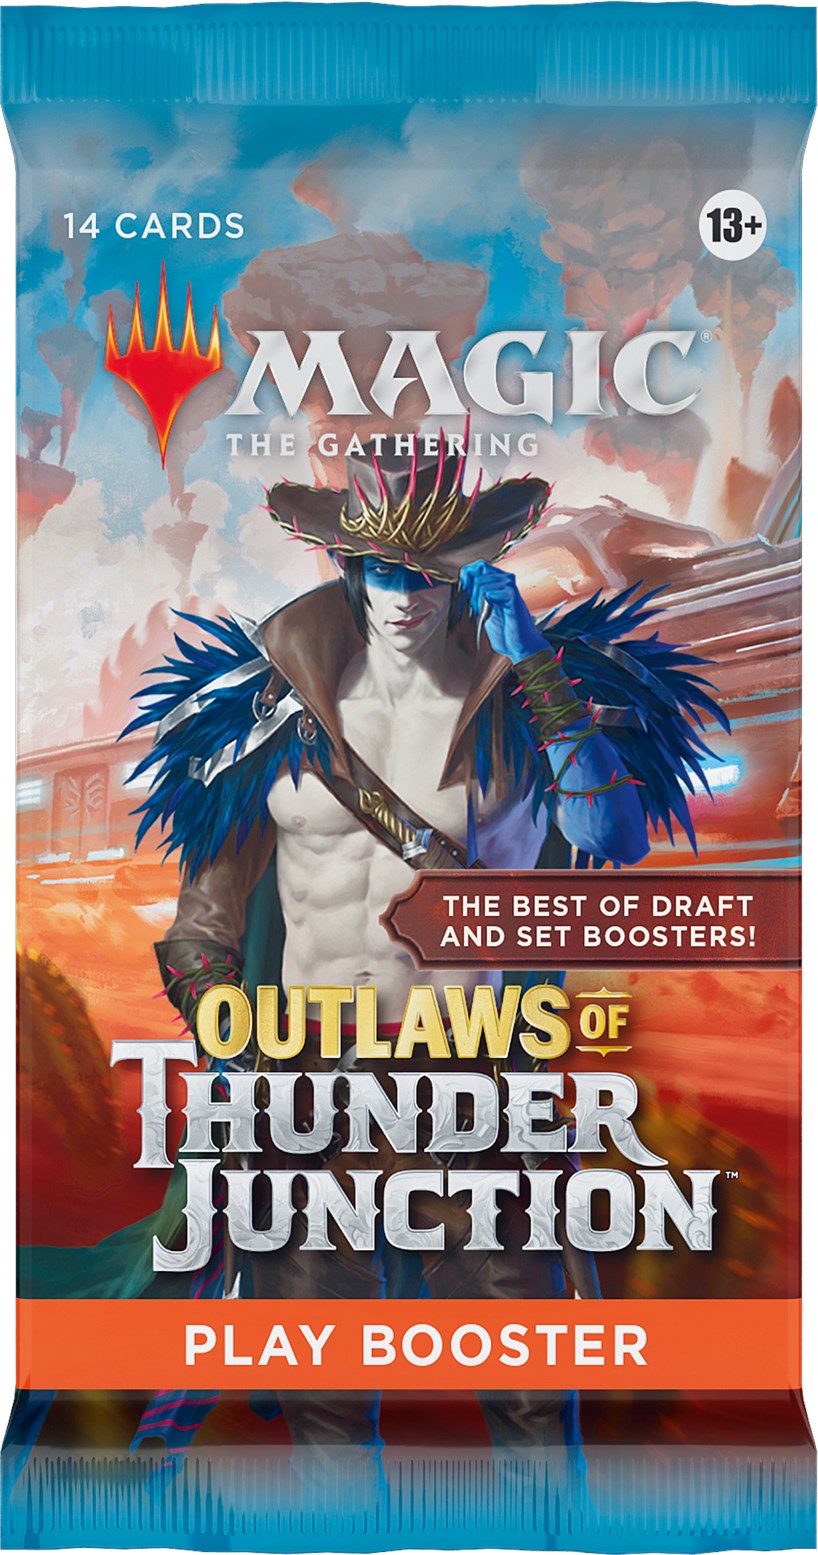 Outlaws of Thunder Junction - Play Booster Pack PRE-ORDER 19 APRIL